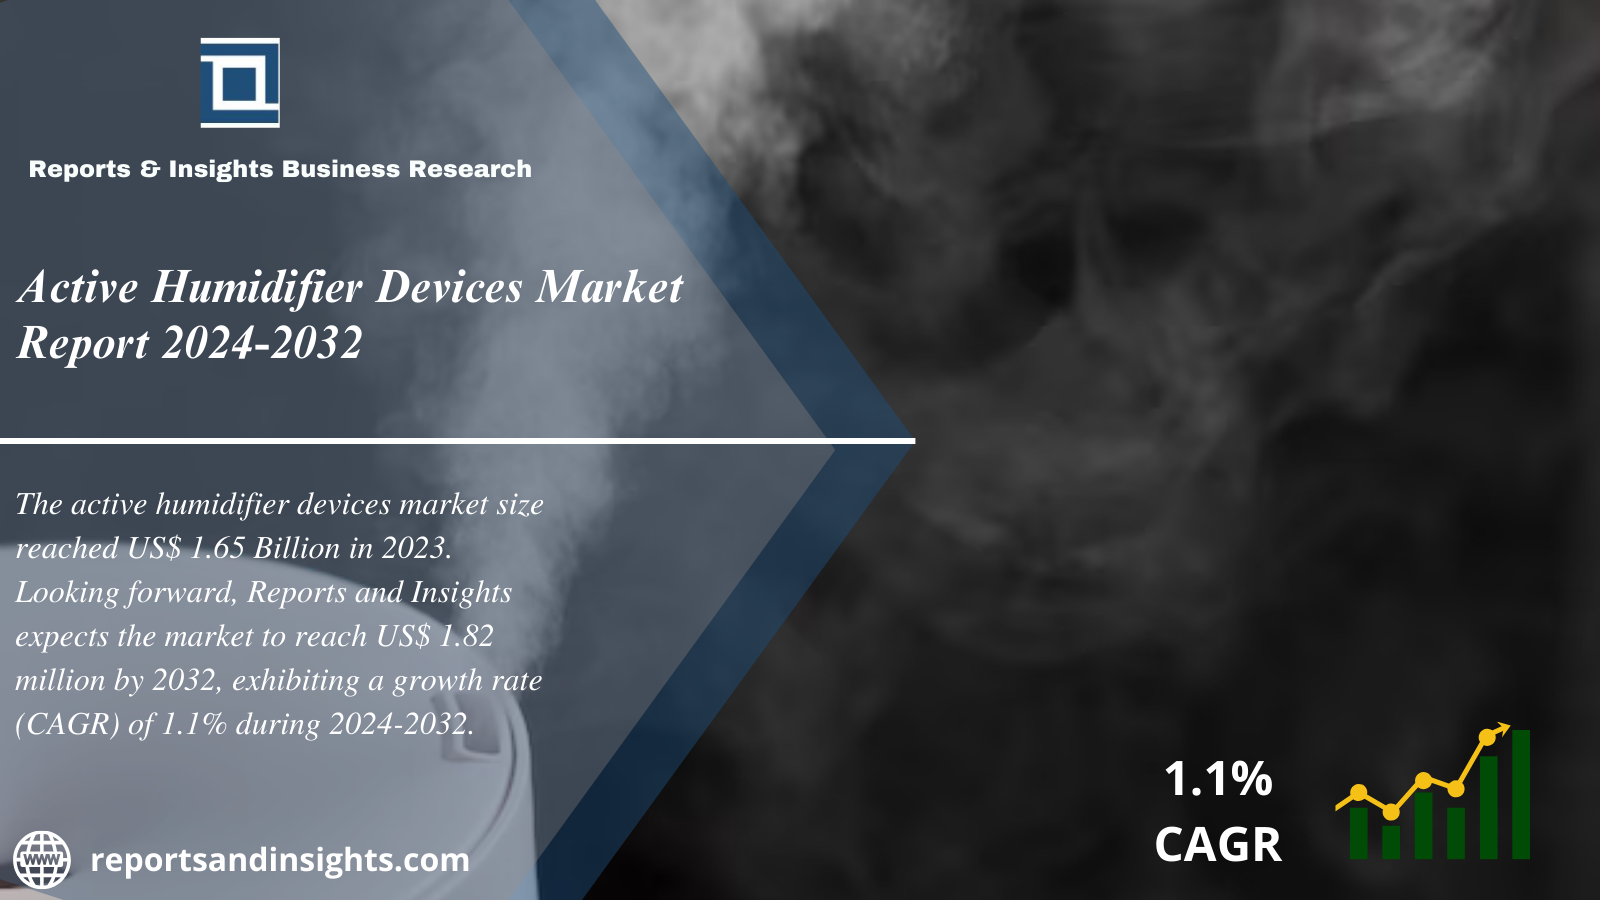 Active Humidifier Devices Market Report, Industry Share, Trends, Share, Size, Growth and Forecast 2024 to 2032